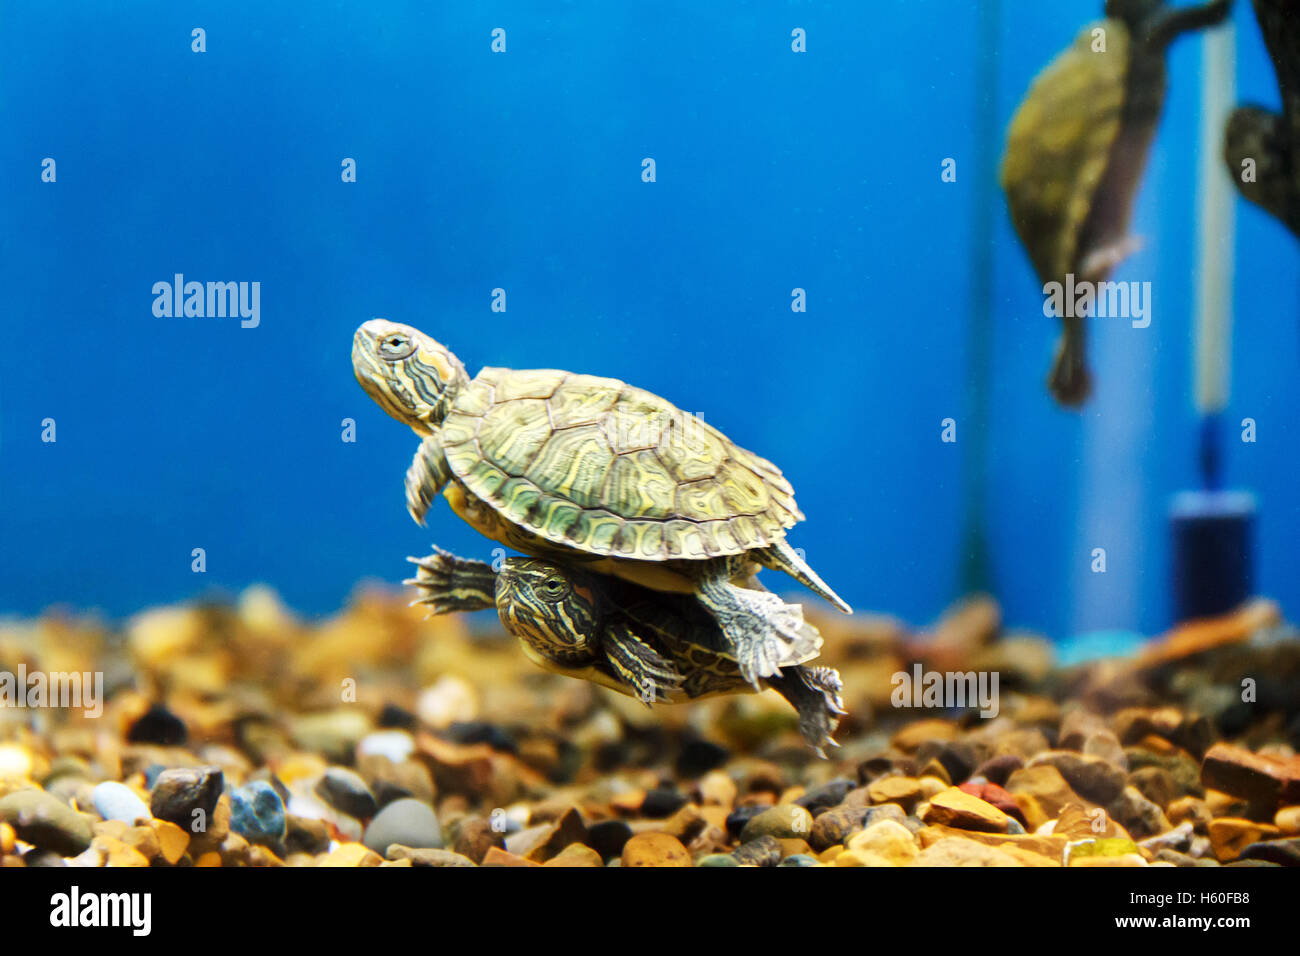 Two turtles swimming in aquarium one over another Stock Photo